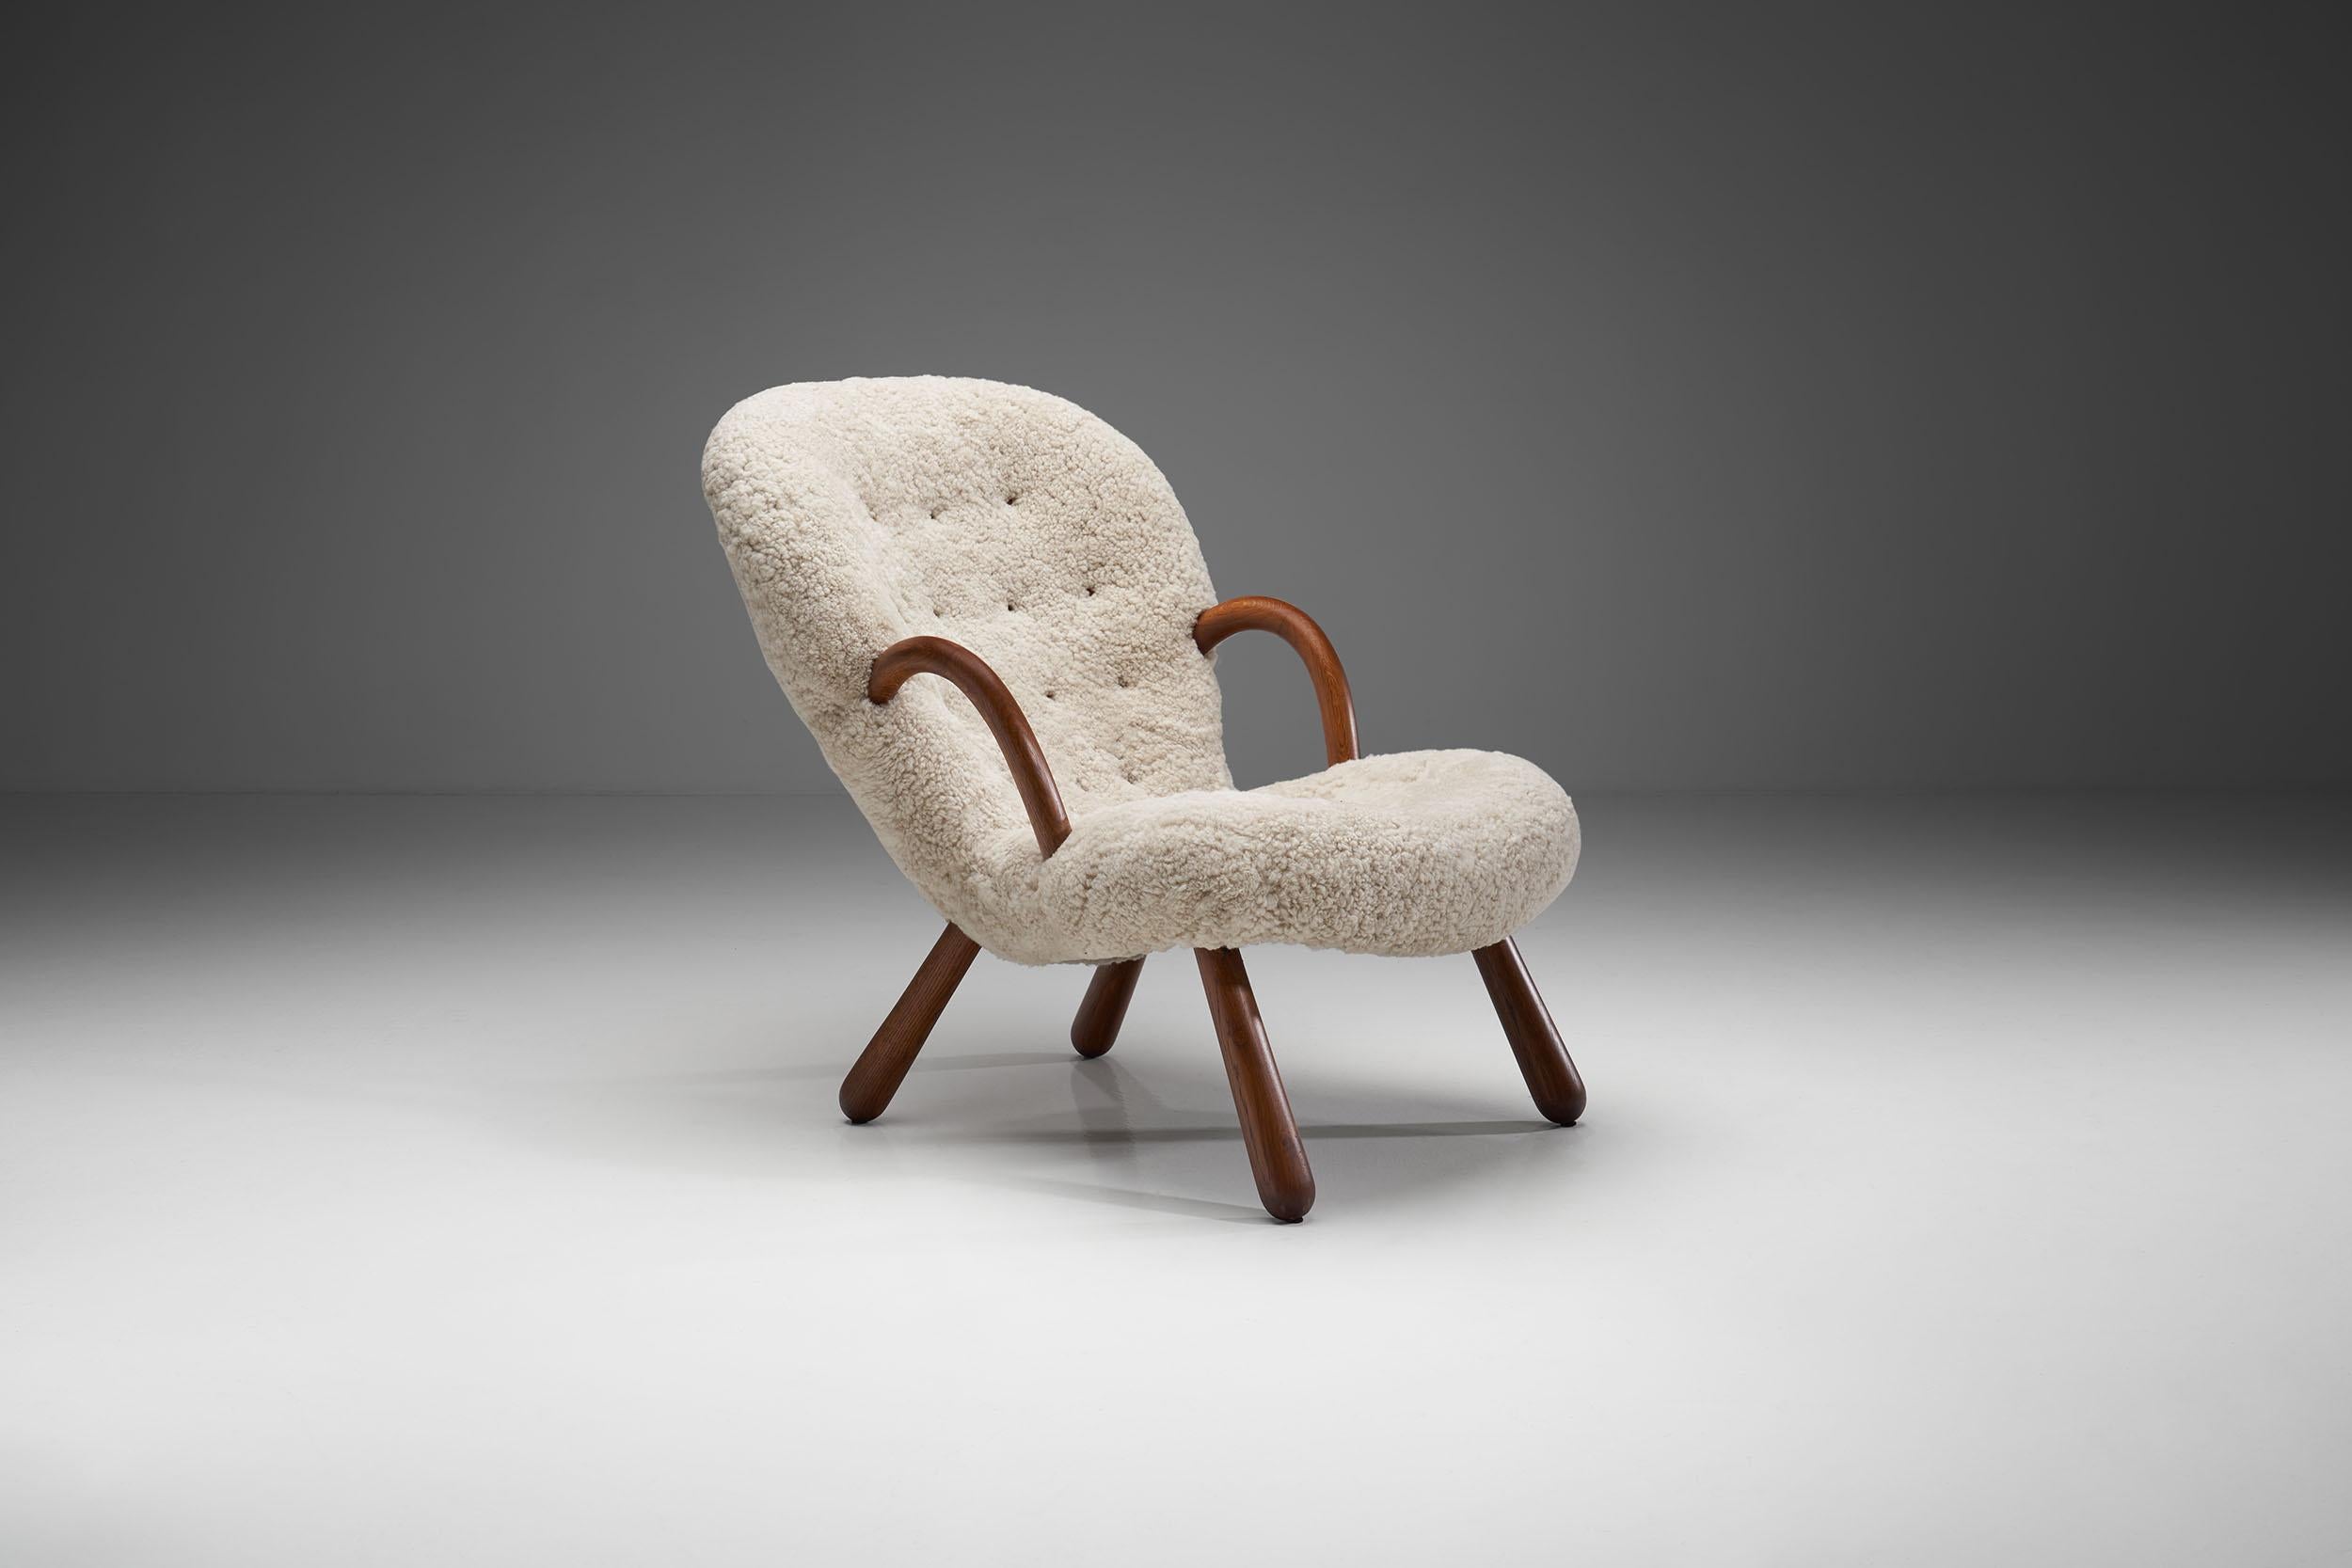 This “Clam” chair has a beloved design thanks to which it is considered by many as one of the most attractive chairs of Nordic Design. At the same time, this chair is arguably also the most mysterious piece on the Danish furniture market.

The model